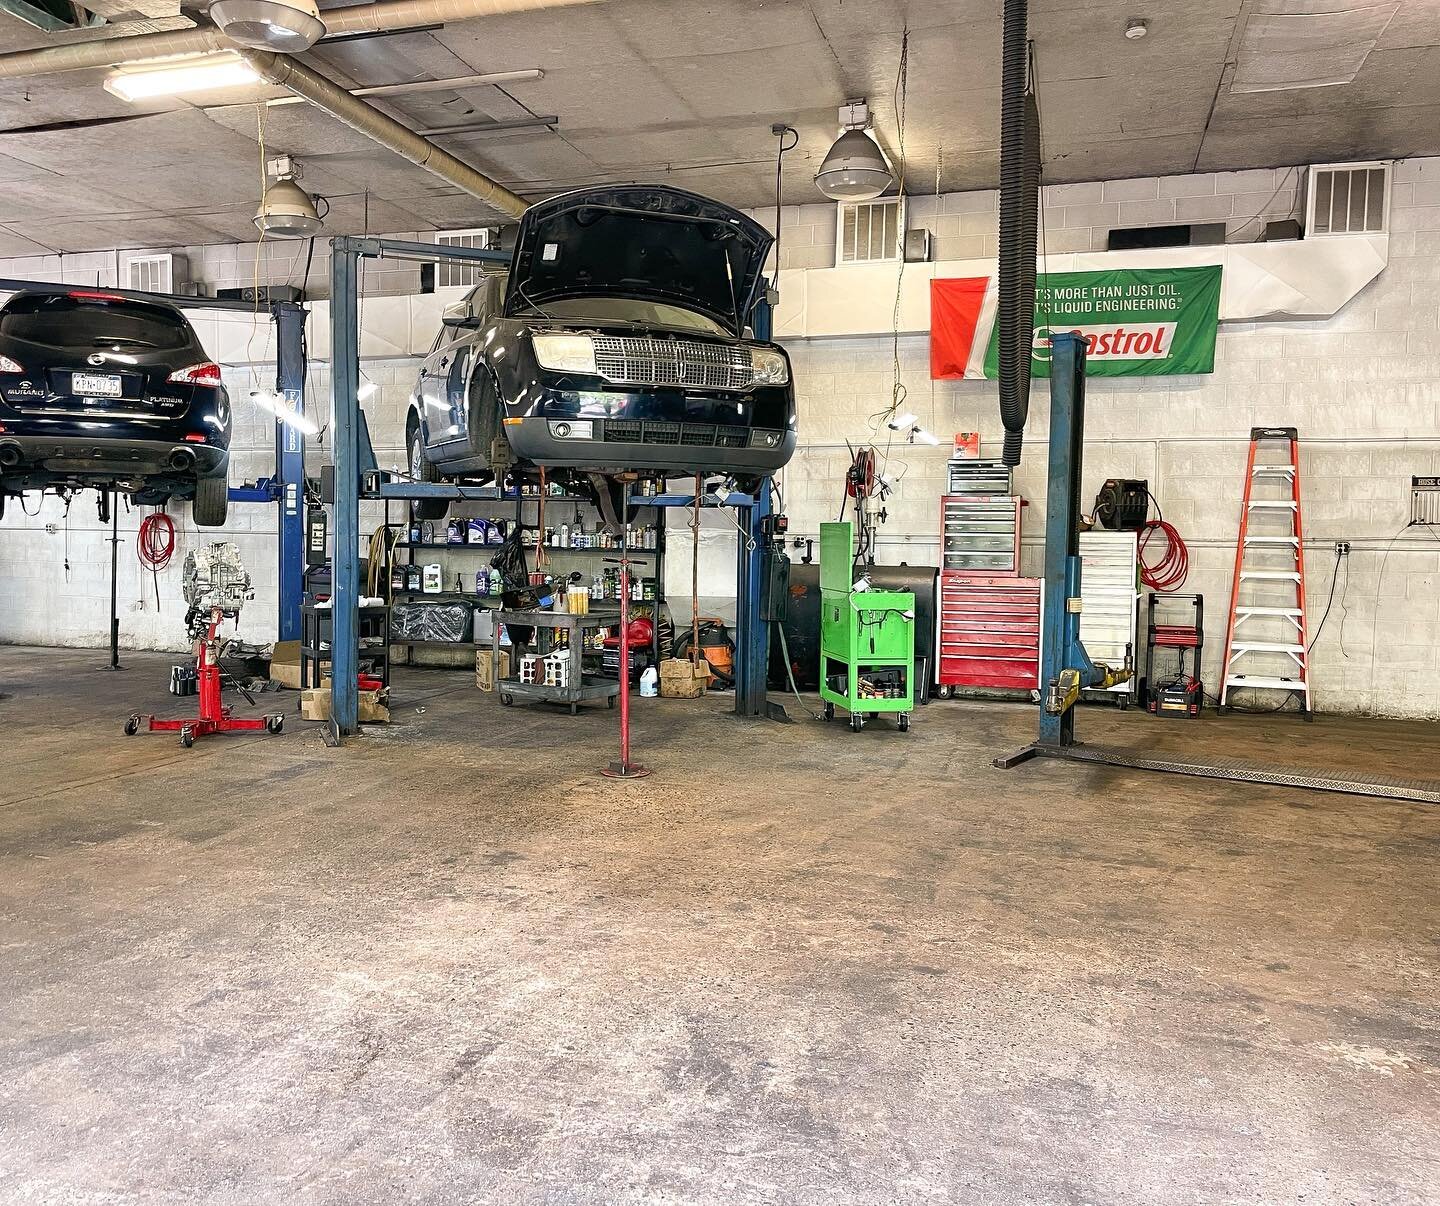 Automotive work is dirty work - there isn&rsquo;t any way to avoid it. 

Last week the team worked hard to clean the shop, give it a much needed scrub. We cleaned out, organized, and the shop feels a lot better! 

We want you to feel confident when y